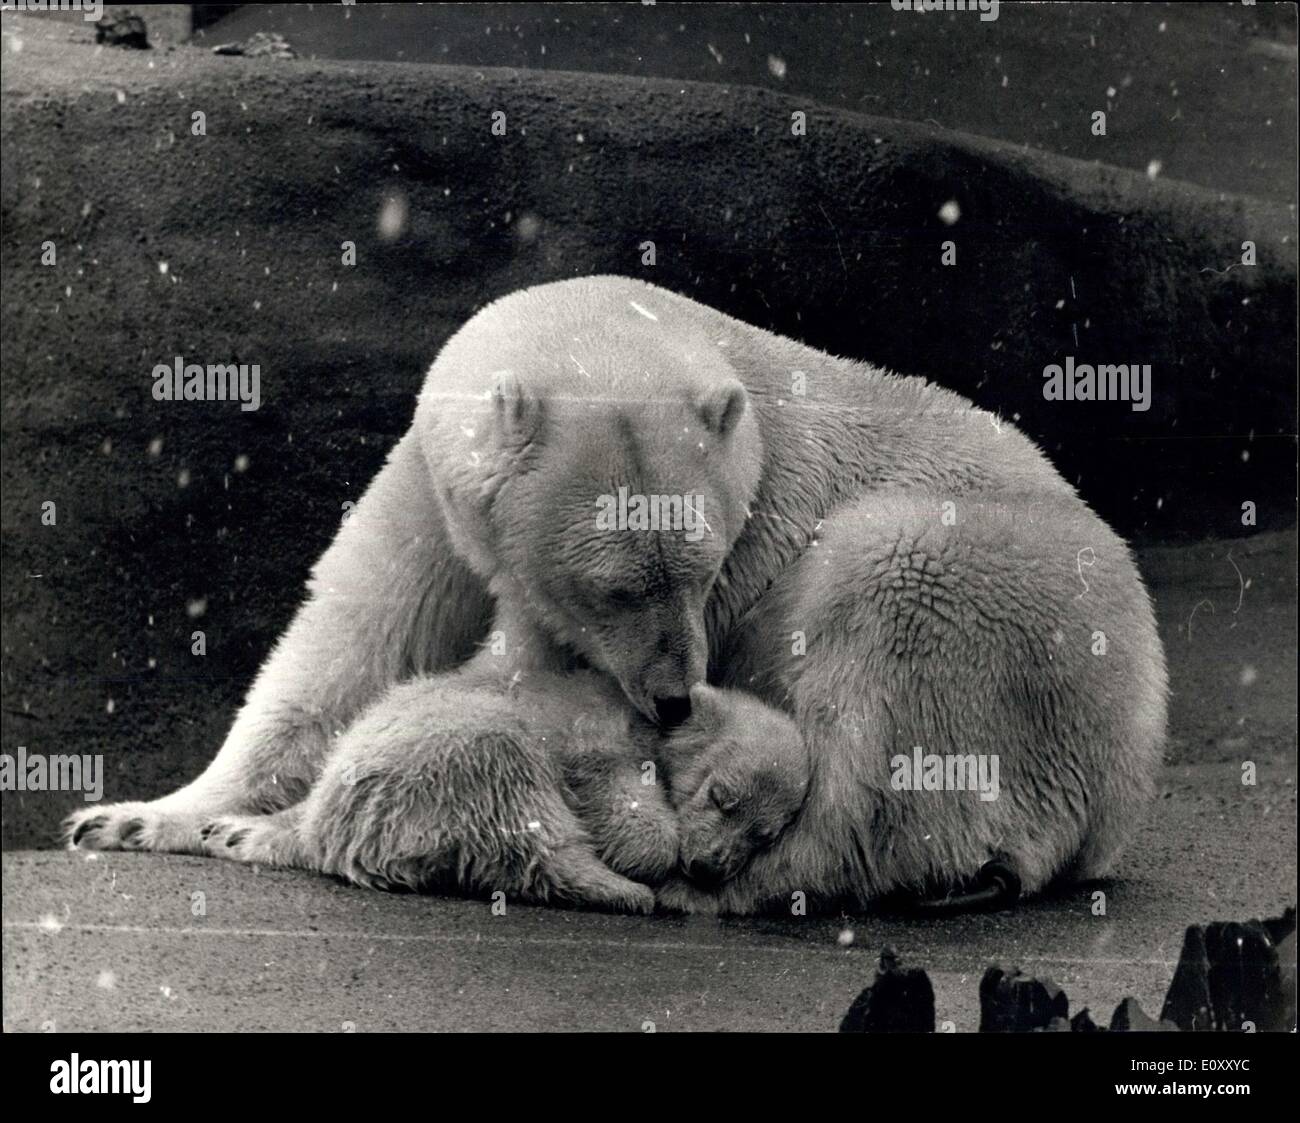 Apr. 02, 1968 - Wintry Conditions at the zoo Pipaluk in the Snow.: Pipaluk, the London Zoo's famous polar bear - snuggles up to Stock Photo